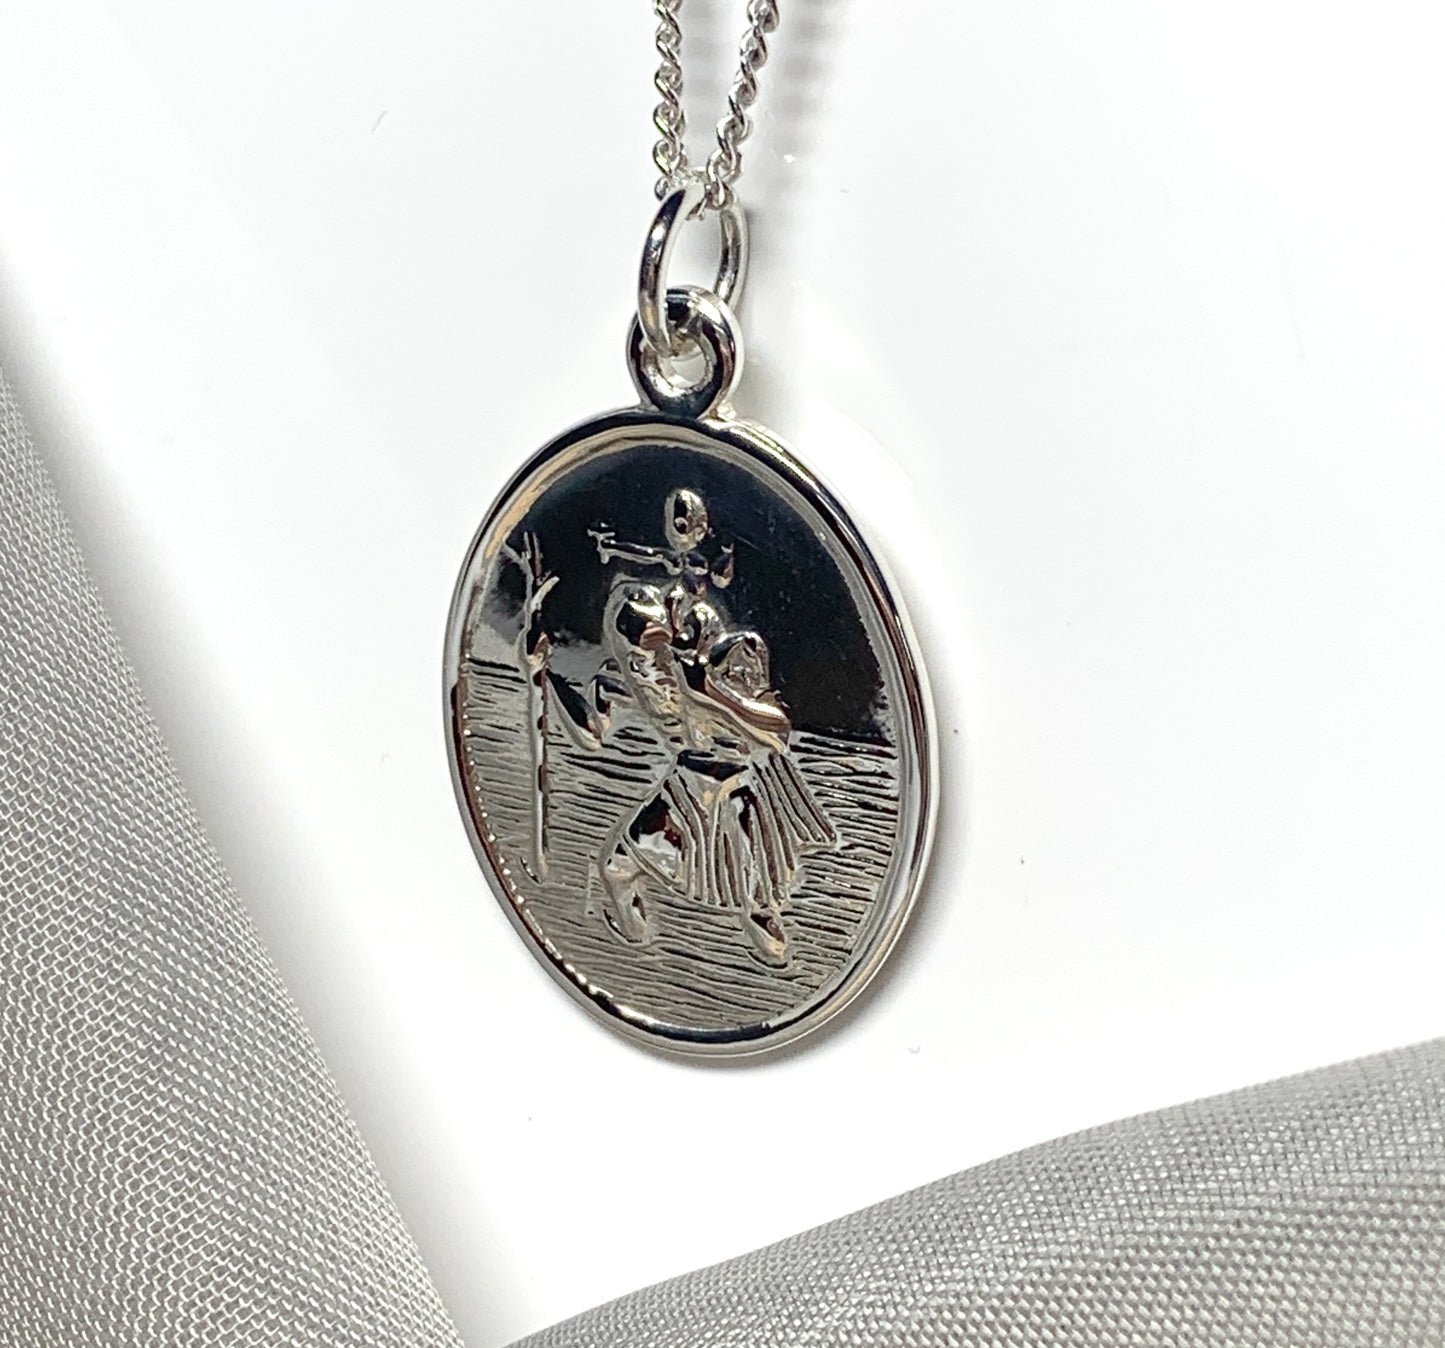 Large sterling silver solid oval St. Christopher